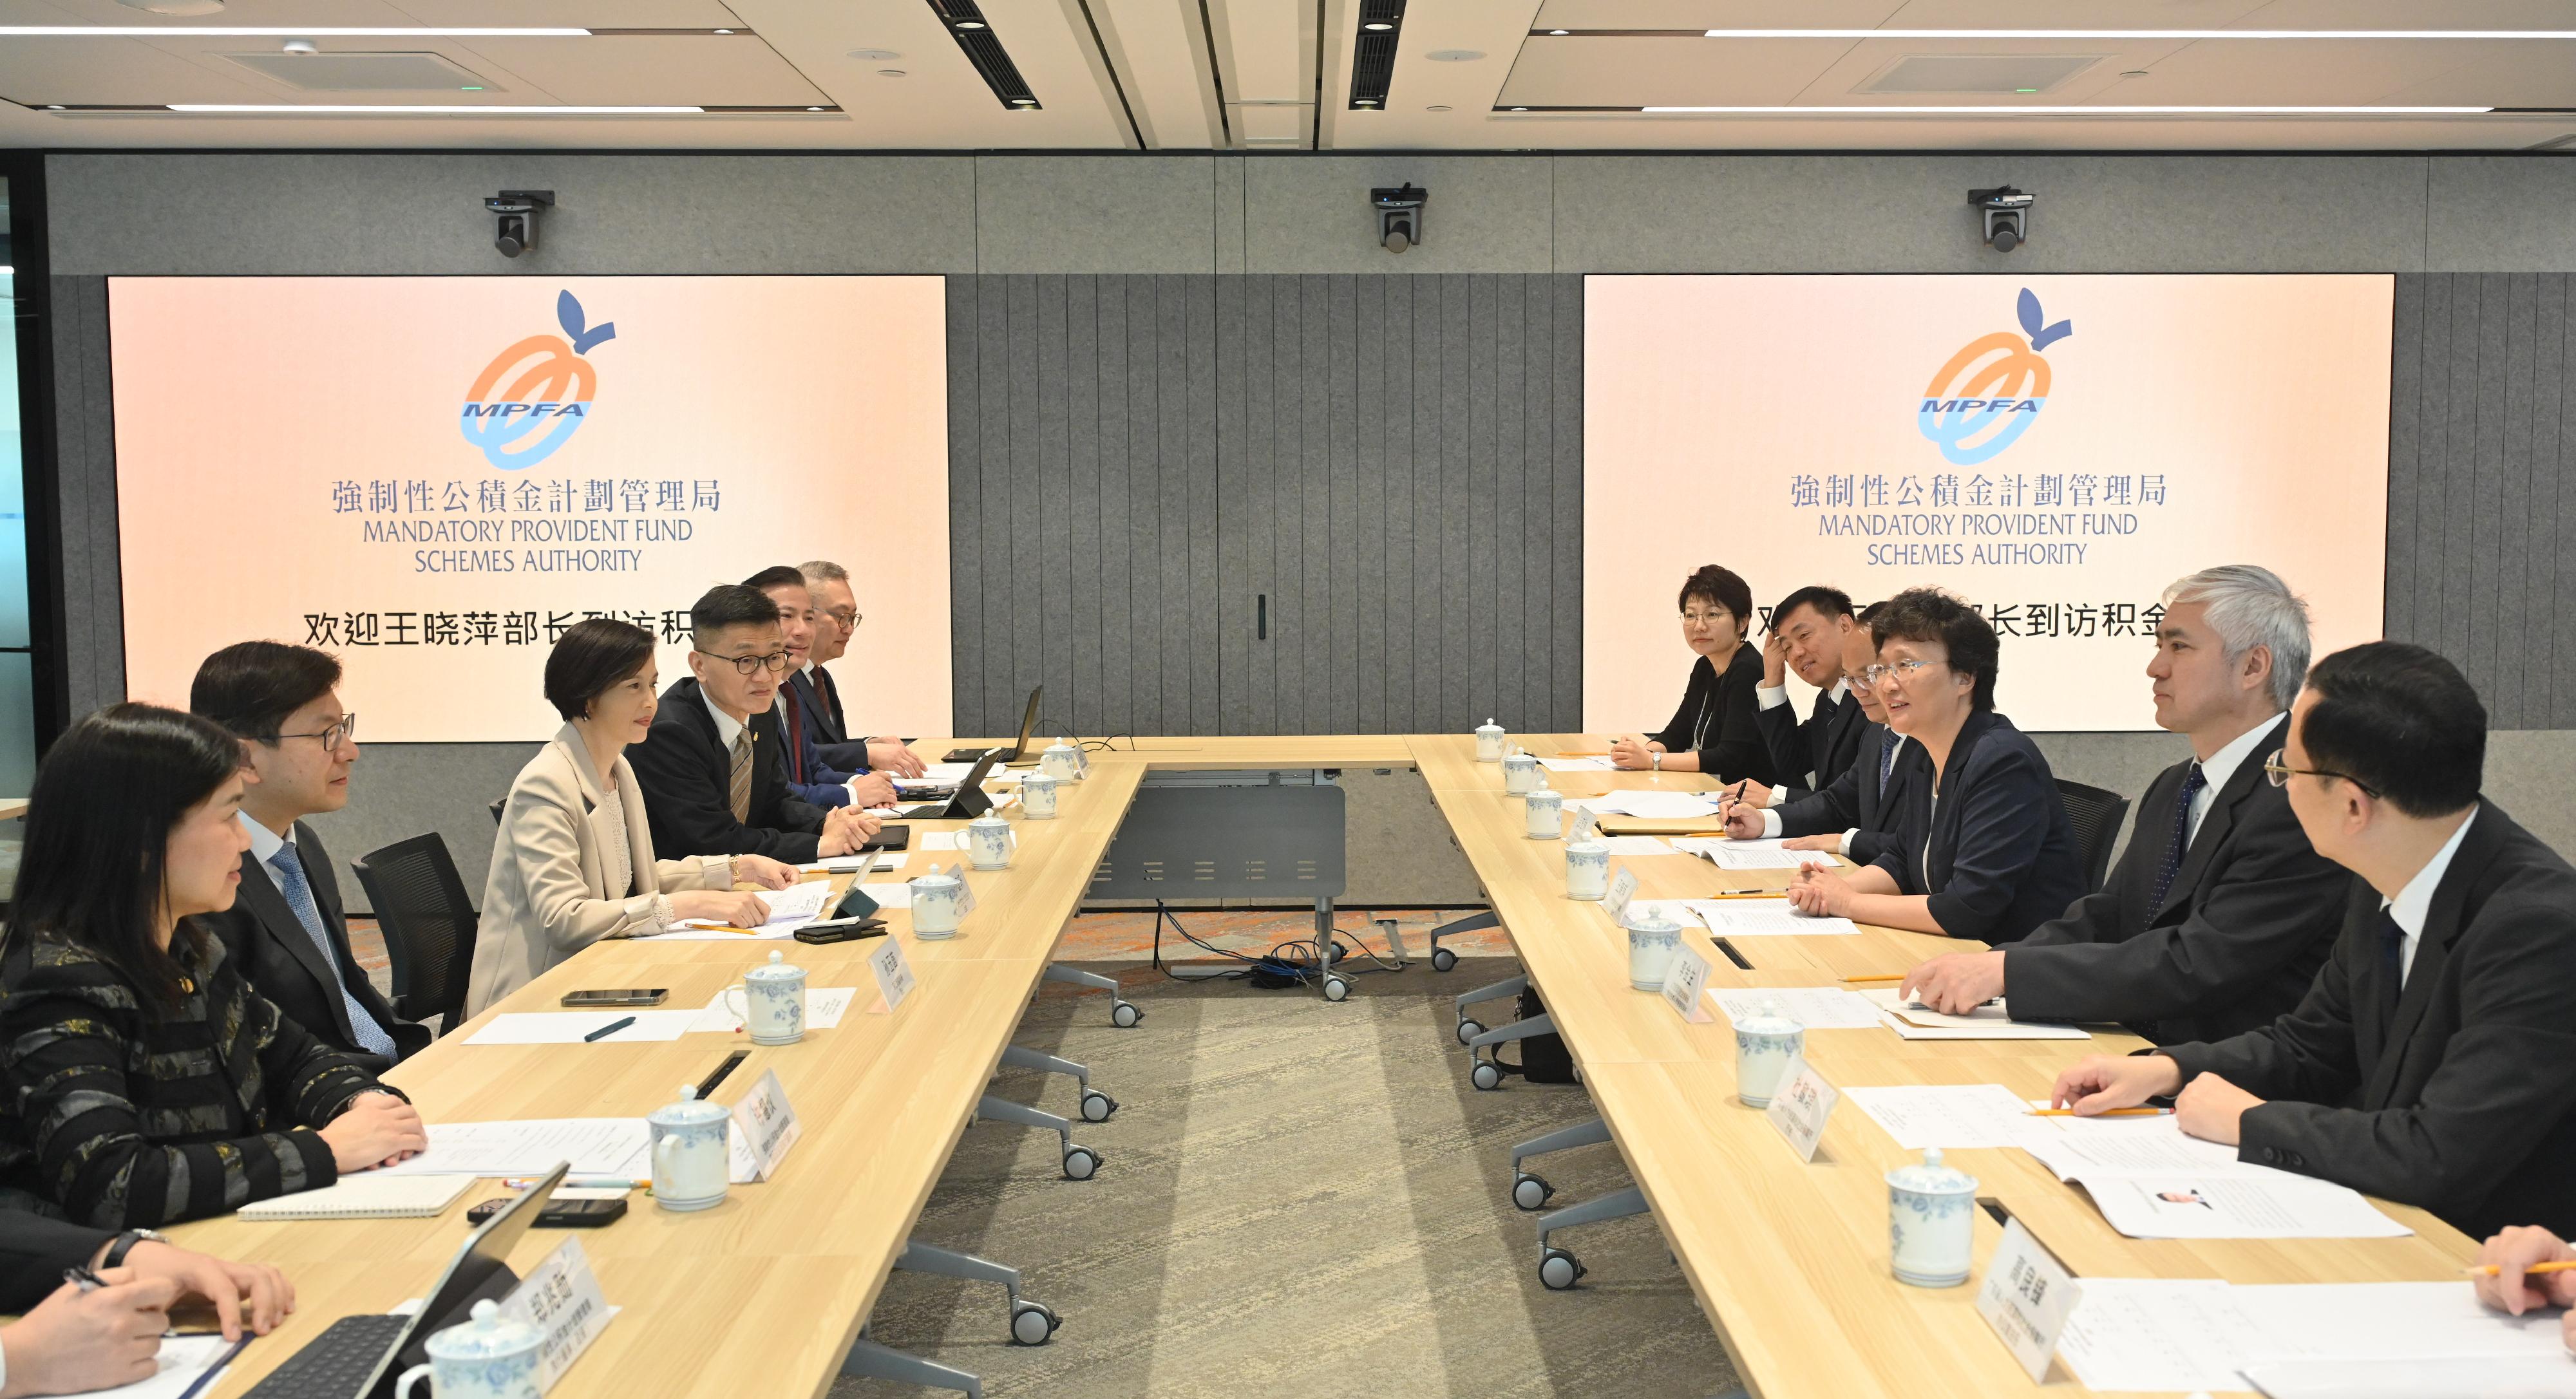 The Minister of Human Resources and Social Security, Ms Wang Xiaoping, visited the Mandatory Provident Fund Schemes Authority (MPFA) and the Construction Industry Recruitment Centre of the Labour Department yesterday (May 6) to get an update on Hong Kong’s retirement protection system and employment services. Photo shows Ms Wang (third right) meeting with the Secretary for Labour and Welfare, Mr Chris Sun (second left), and the Chairman of the MPFA, Mrs Ayesha Macpherson Lau (third left).